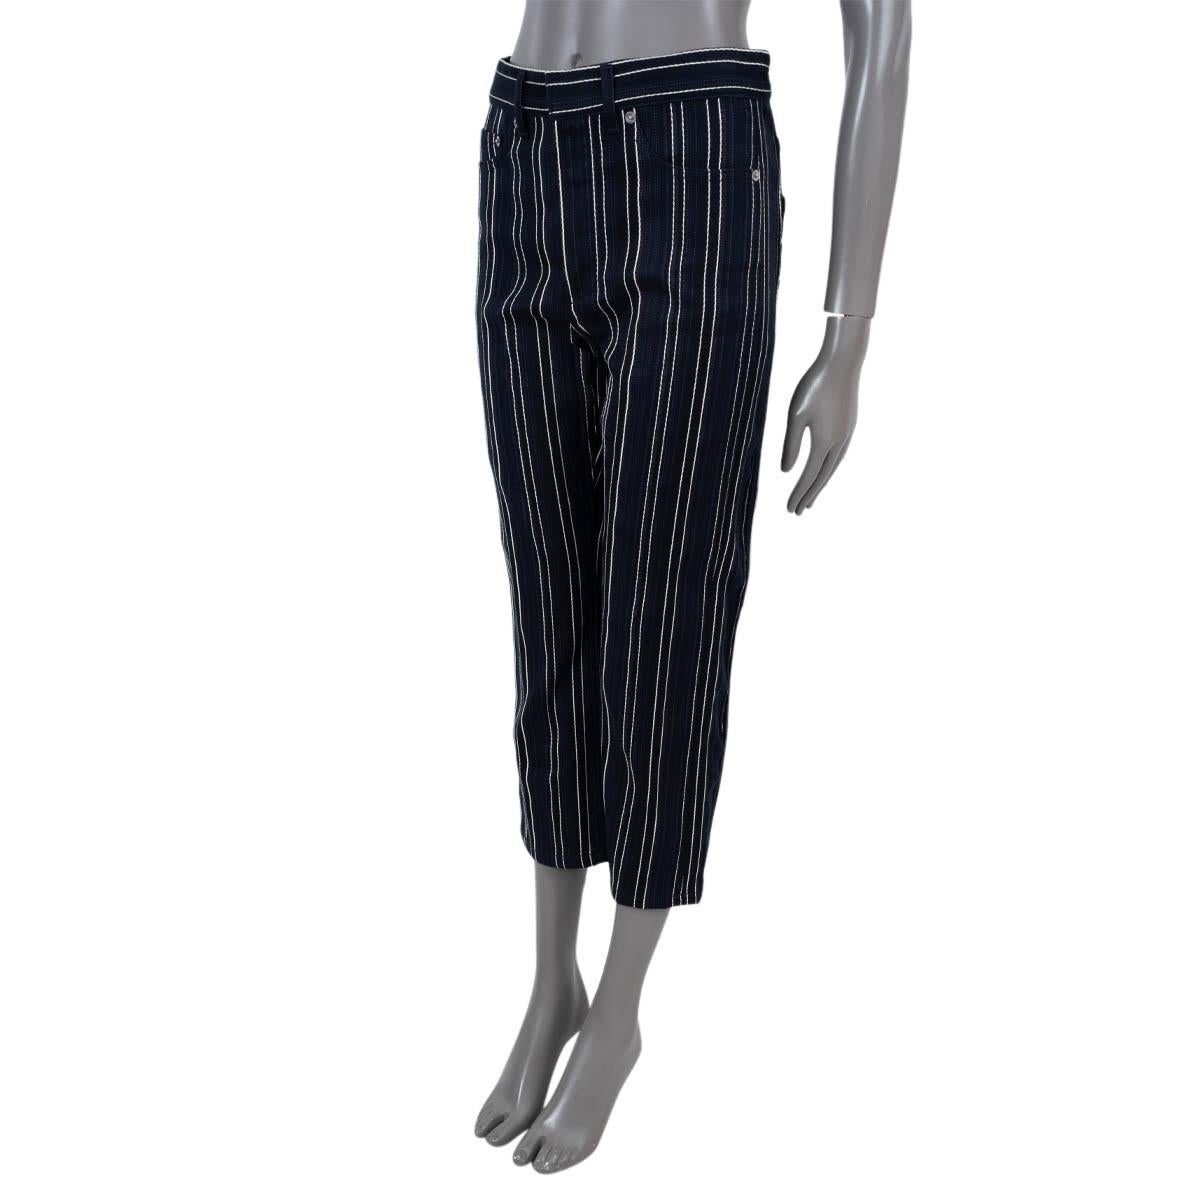 100% authentic Christian Dior striped cropped jeans in navy blue, black and cream cotton (100%). Features slit pockets on the front and back and belt loops. Open with a zipper and a hook on the front. Have been worn and are in excellent condition.